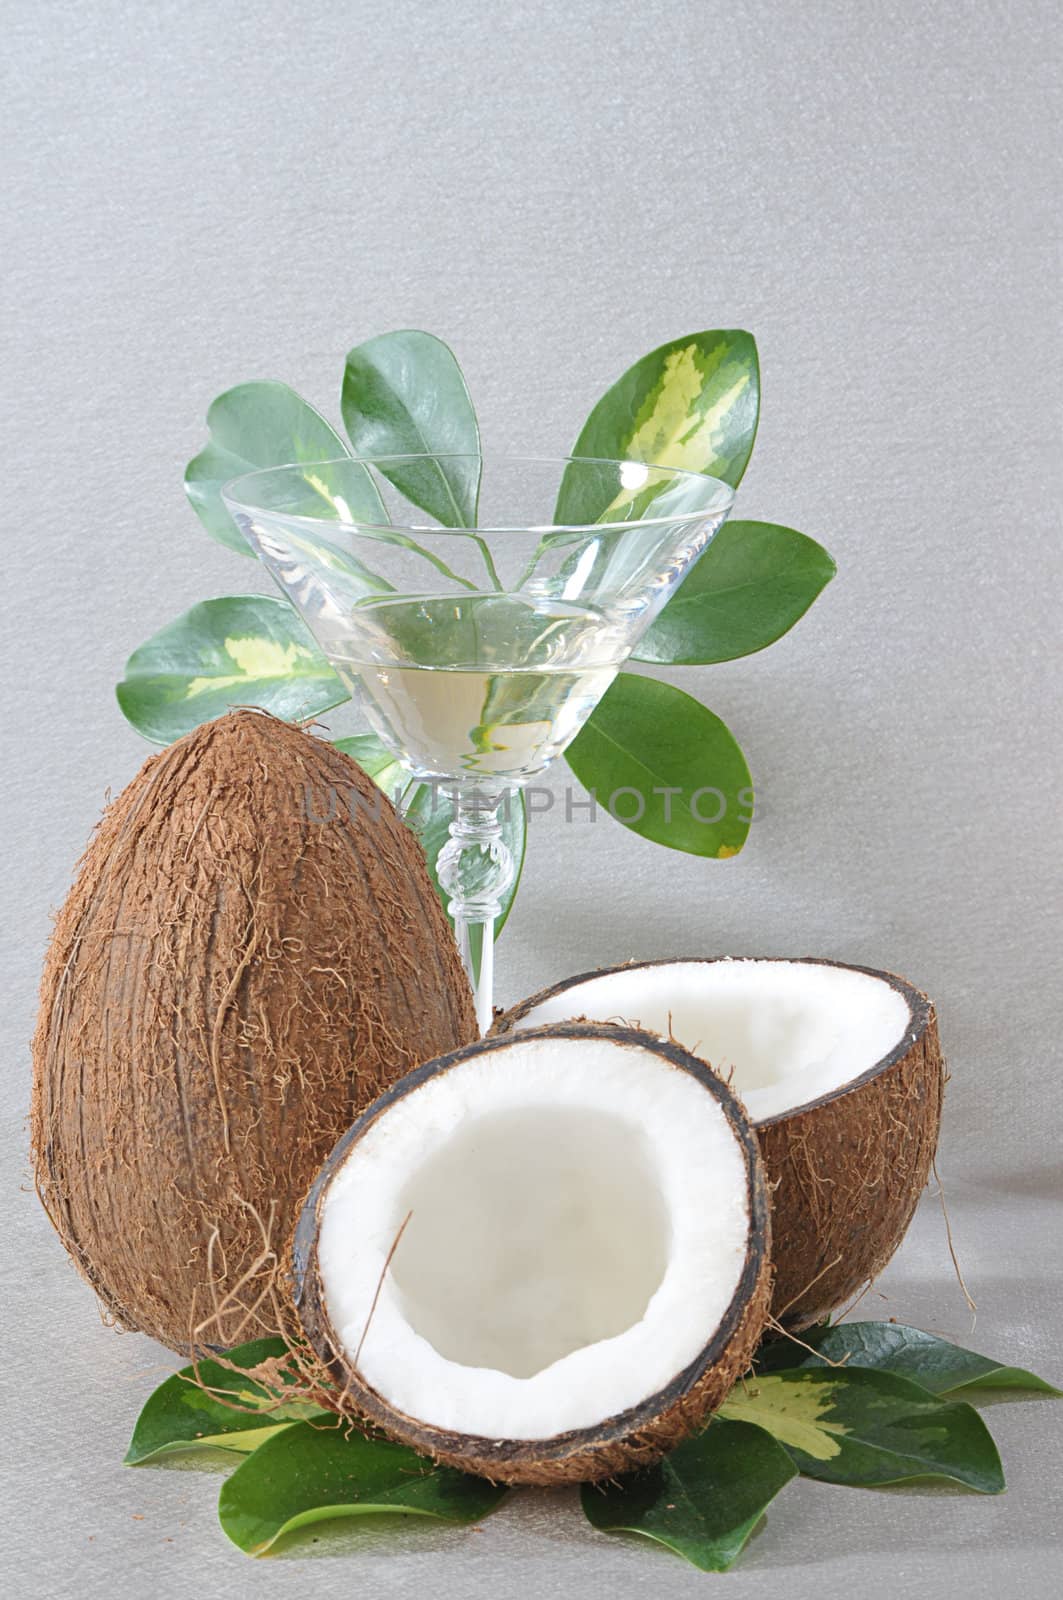 Broken coconut and glass of white wine